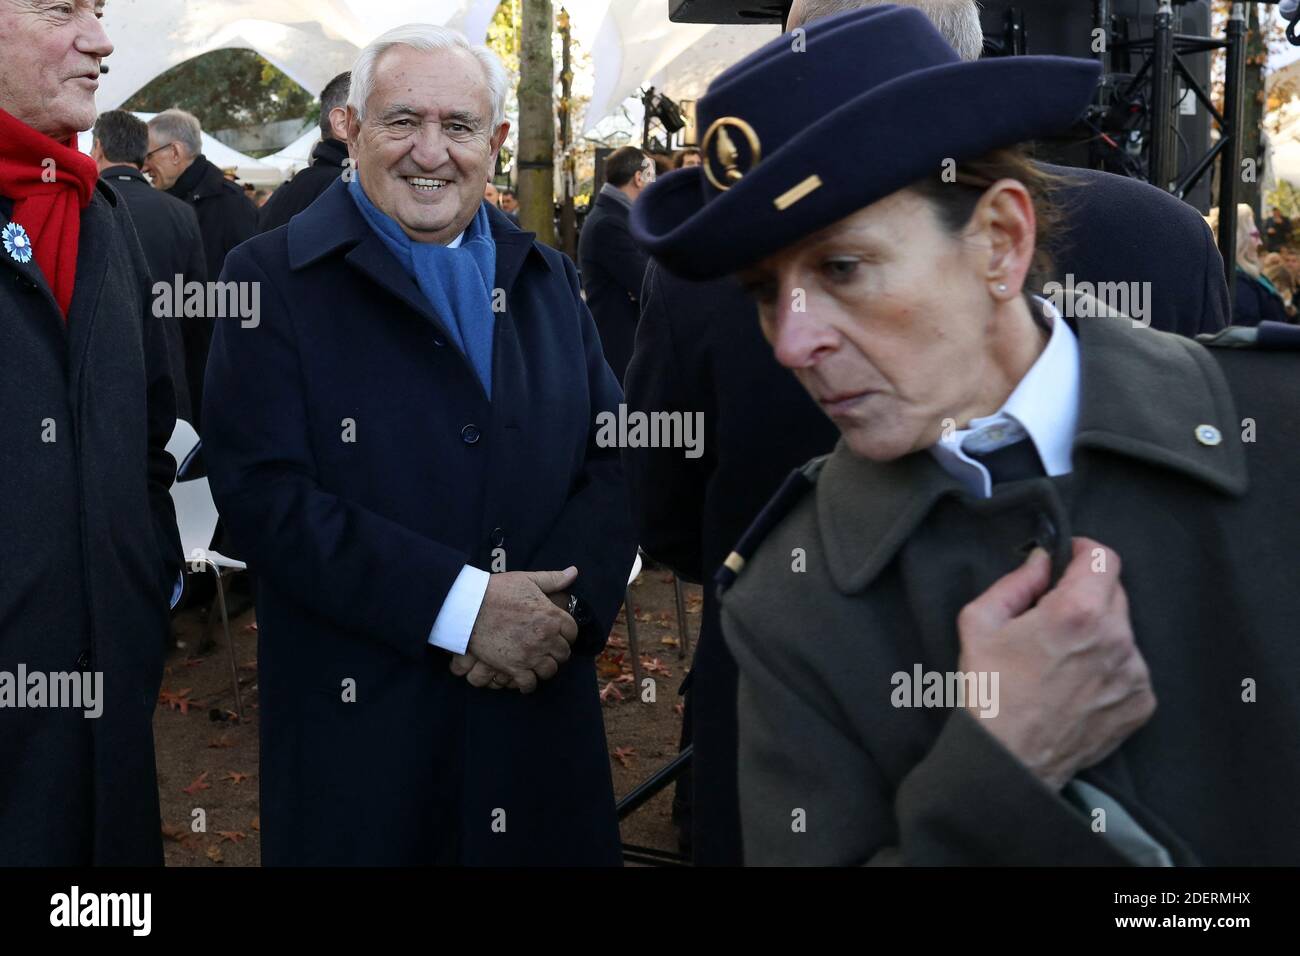 Former Prime minister Jean-Pierre Raffarin at official inauguration of the 'Monument aux morts pour la France en operations exterieures' (OPEX) by French artist Stephane Vigny on November 11, 2019 in the Eugenie-Djendi garden in Paris, France, as part of commemorations marking the 101st anniversary of the 11 November 1918 armistice, ending World War I. Photo by Stephane Lemouton/Pool/ABACAPRESS.COM Stock Photo